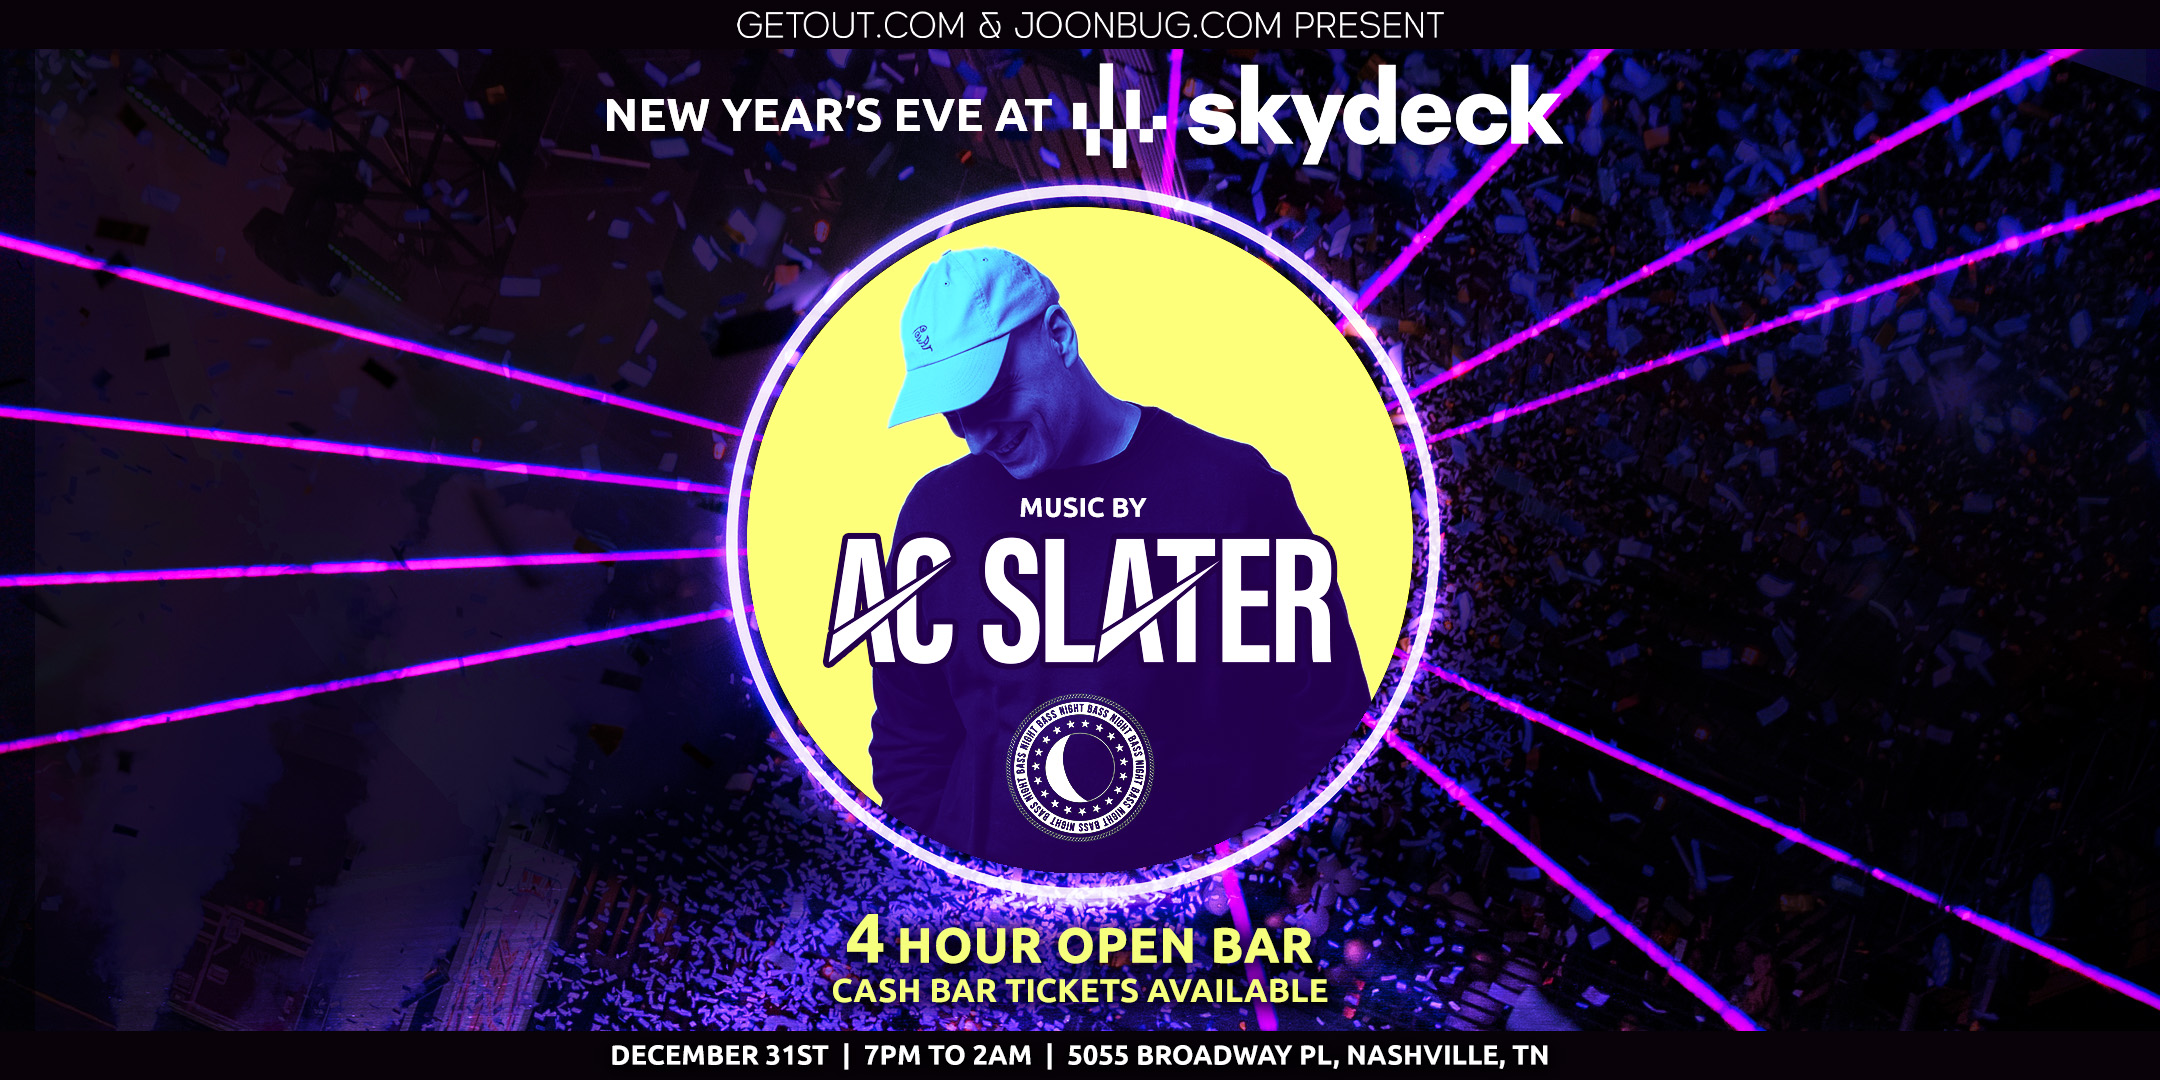 Promo image of New Years Eve on Skydeck